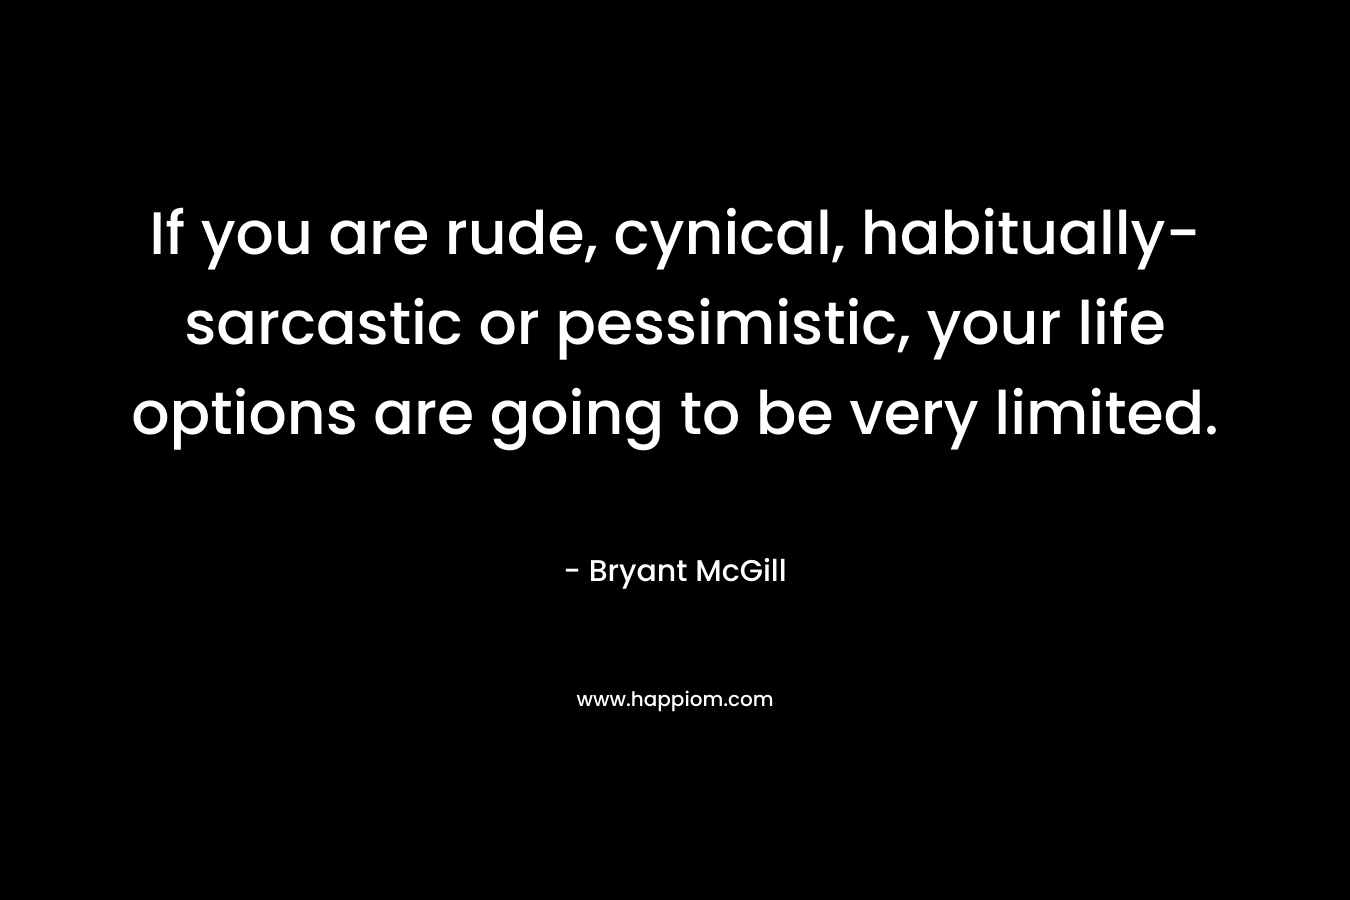 If you are rude, cynical, habitually-sarcastic or pessimistic, your life options are going to be very limited. – Bryant McGill